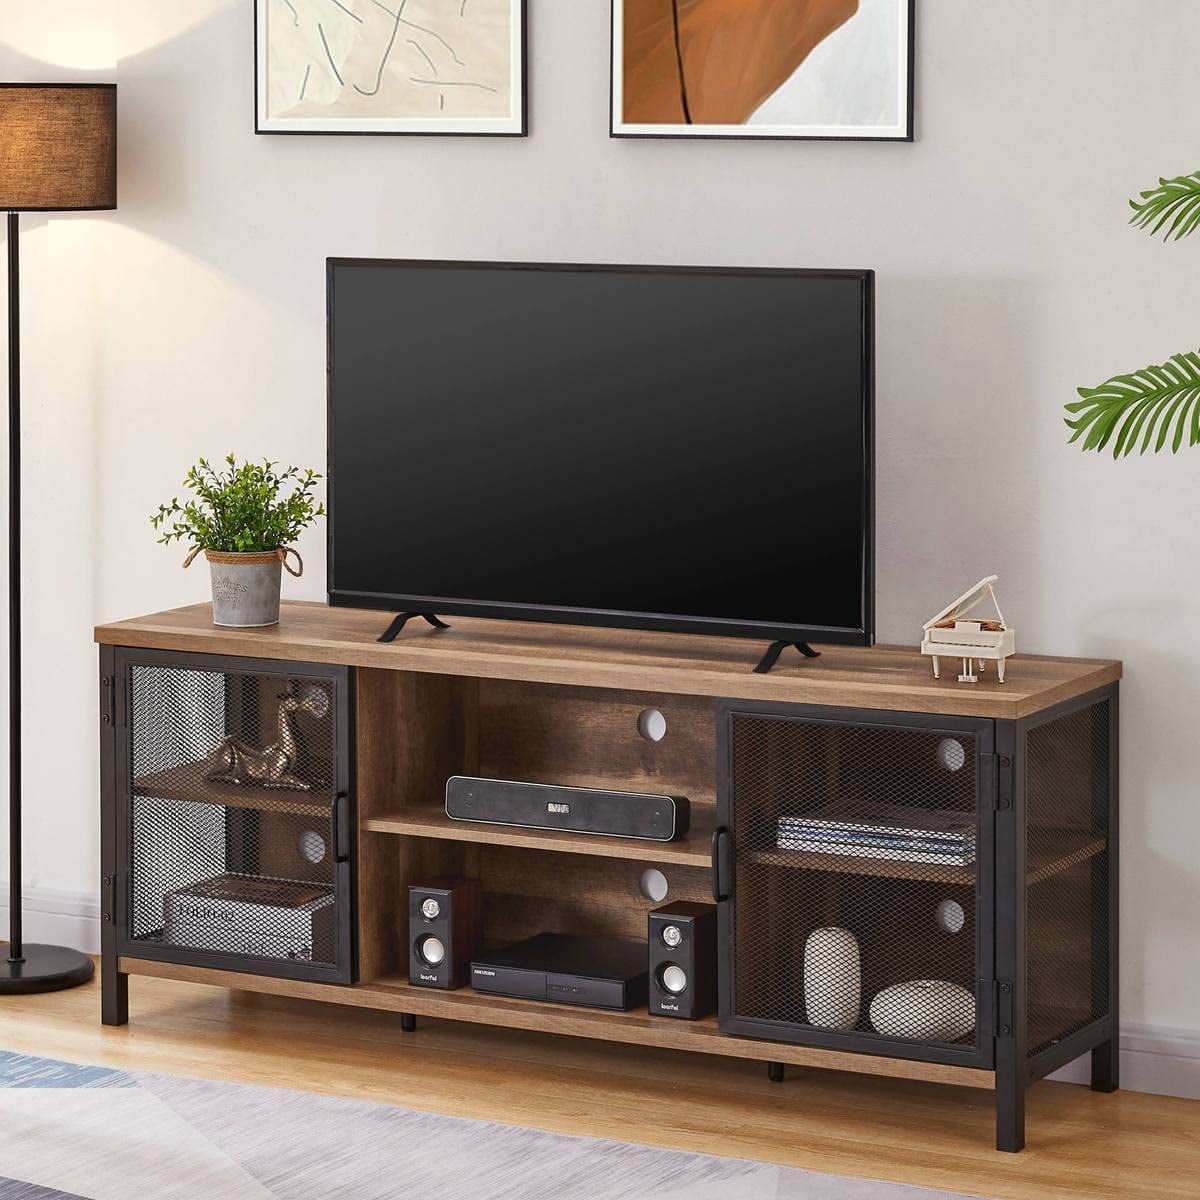 Zzpface Industrial Entertainment Center For Tvs Up To 65 Inch, Rustic Throughout Wide Entertainment Centers (Gallery 12 of 20)